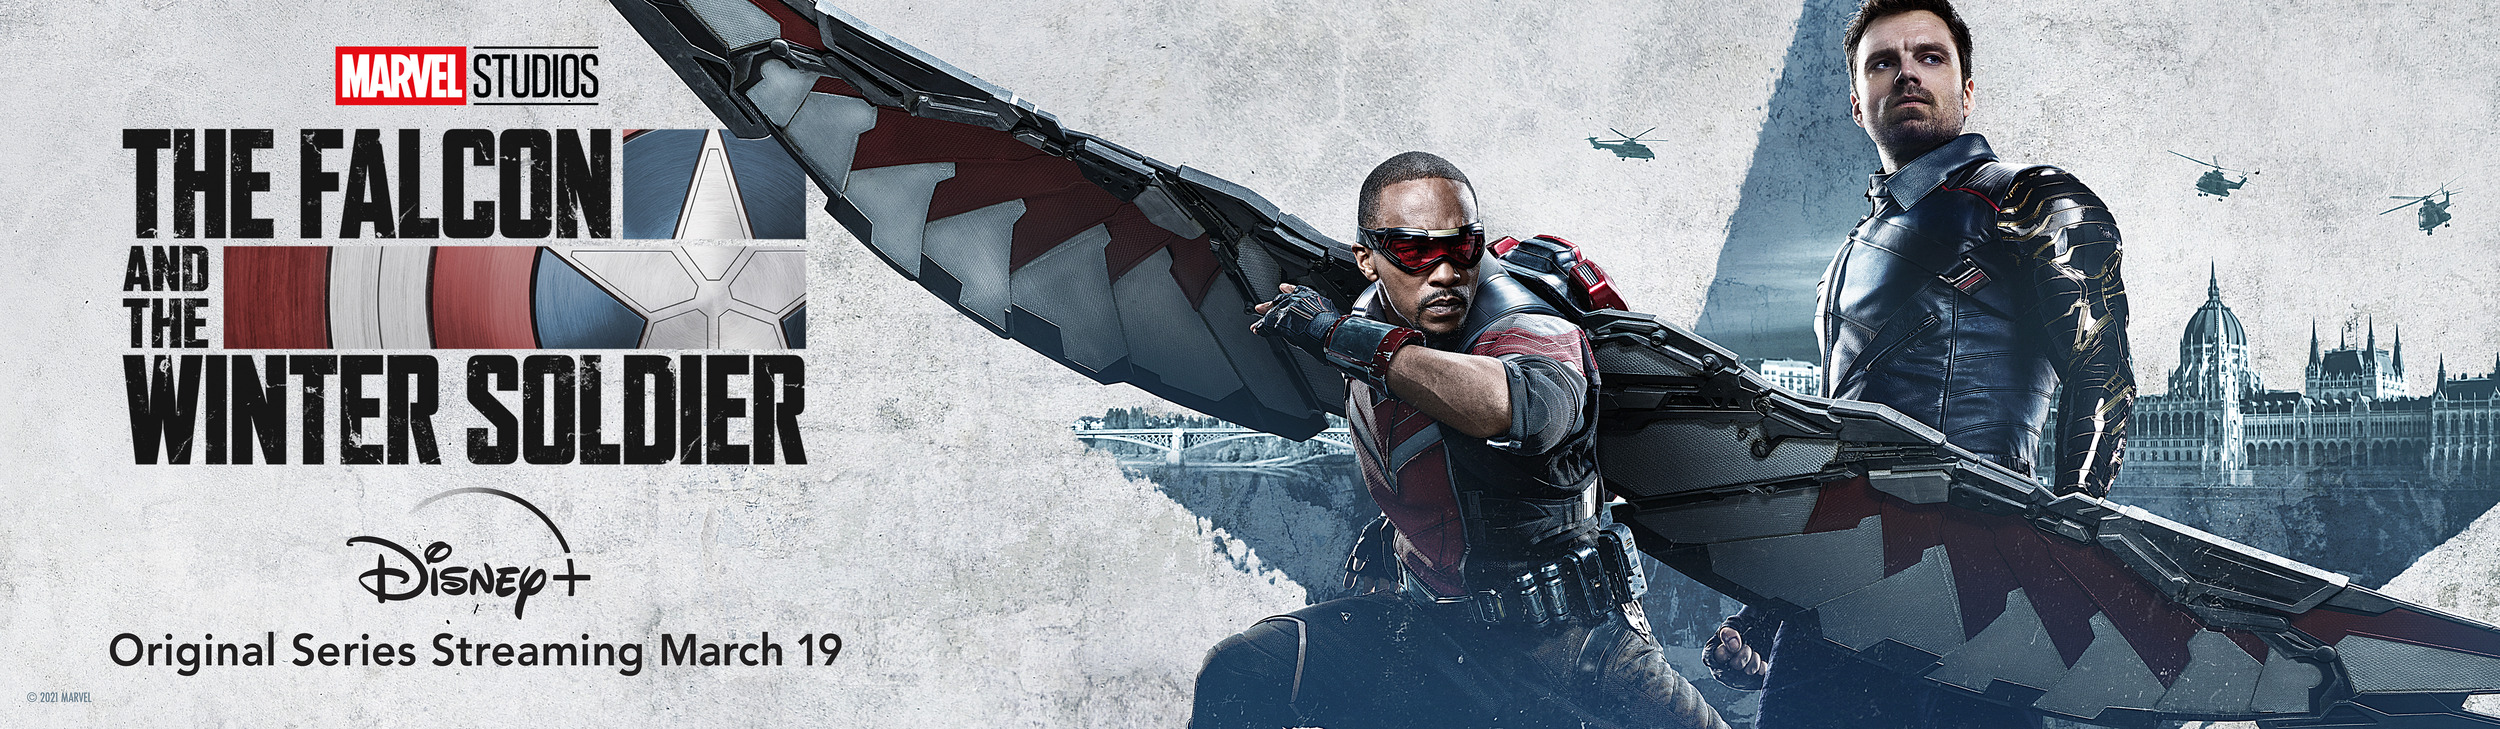 Mega Sized TV Poster Image for The Falcon and the Winter Soldier (#8 of 11)